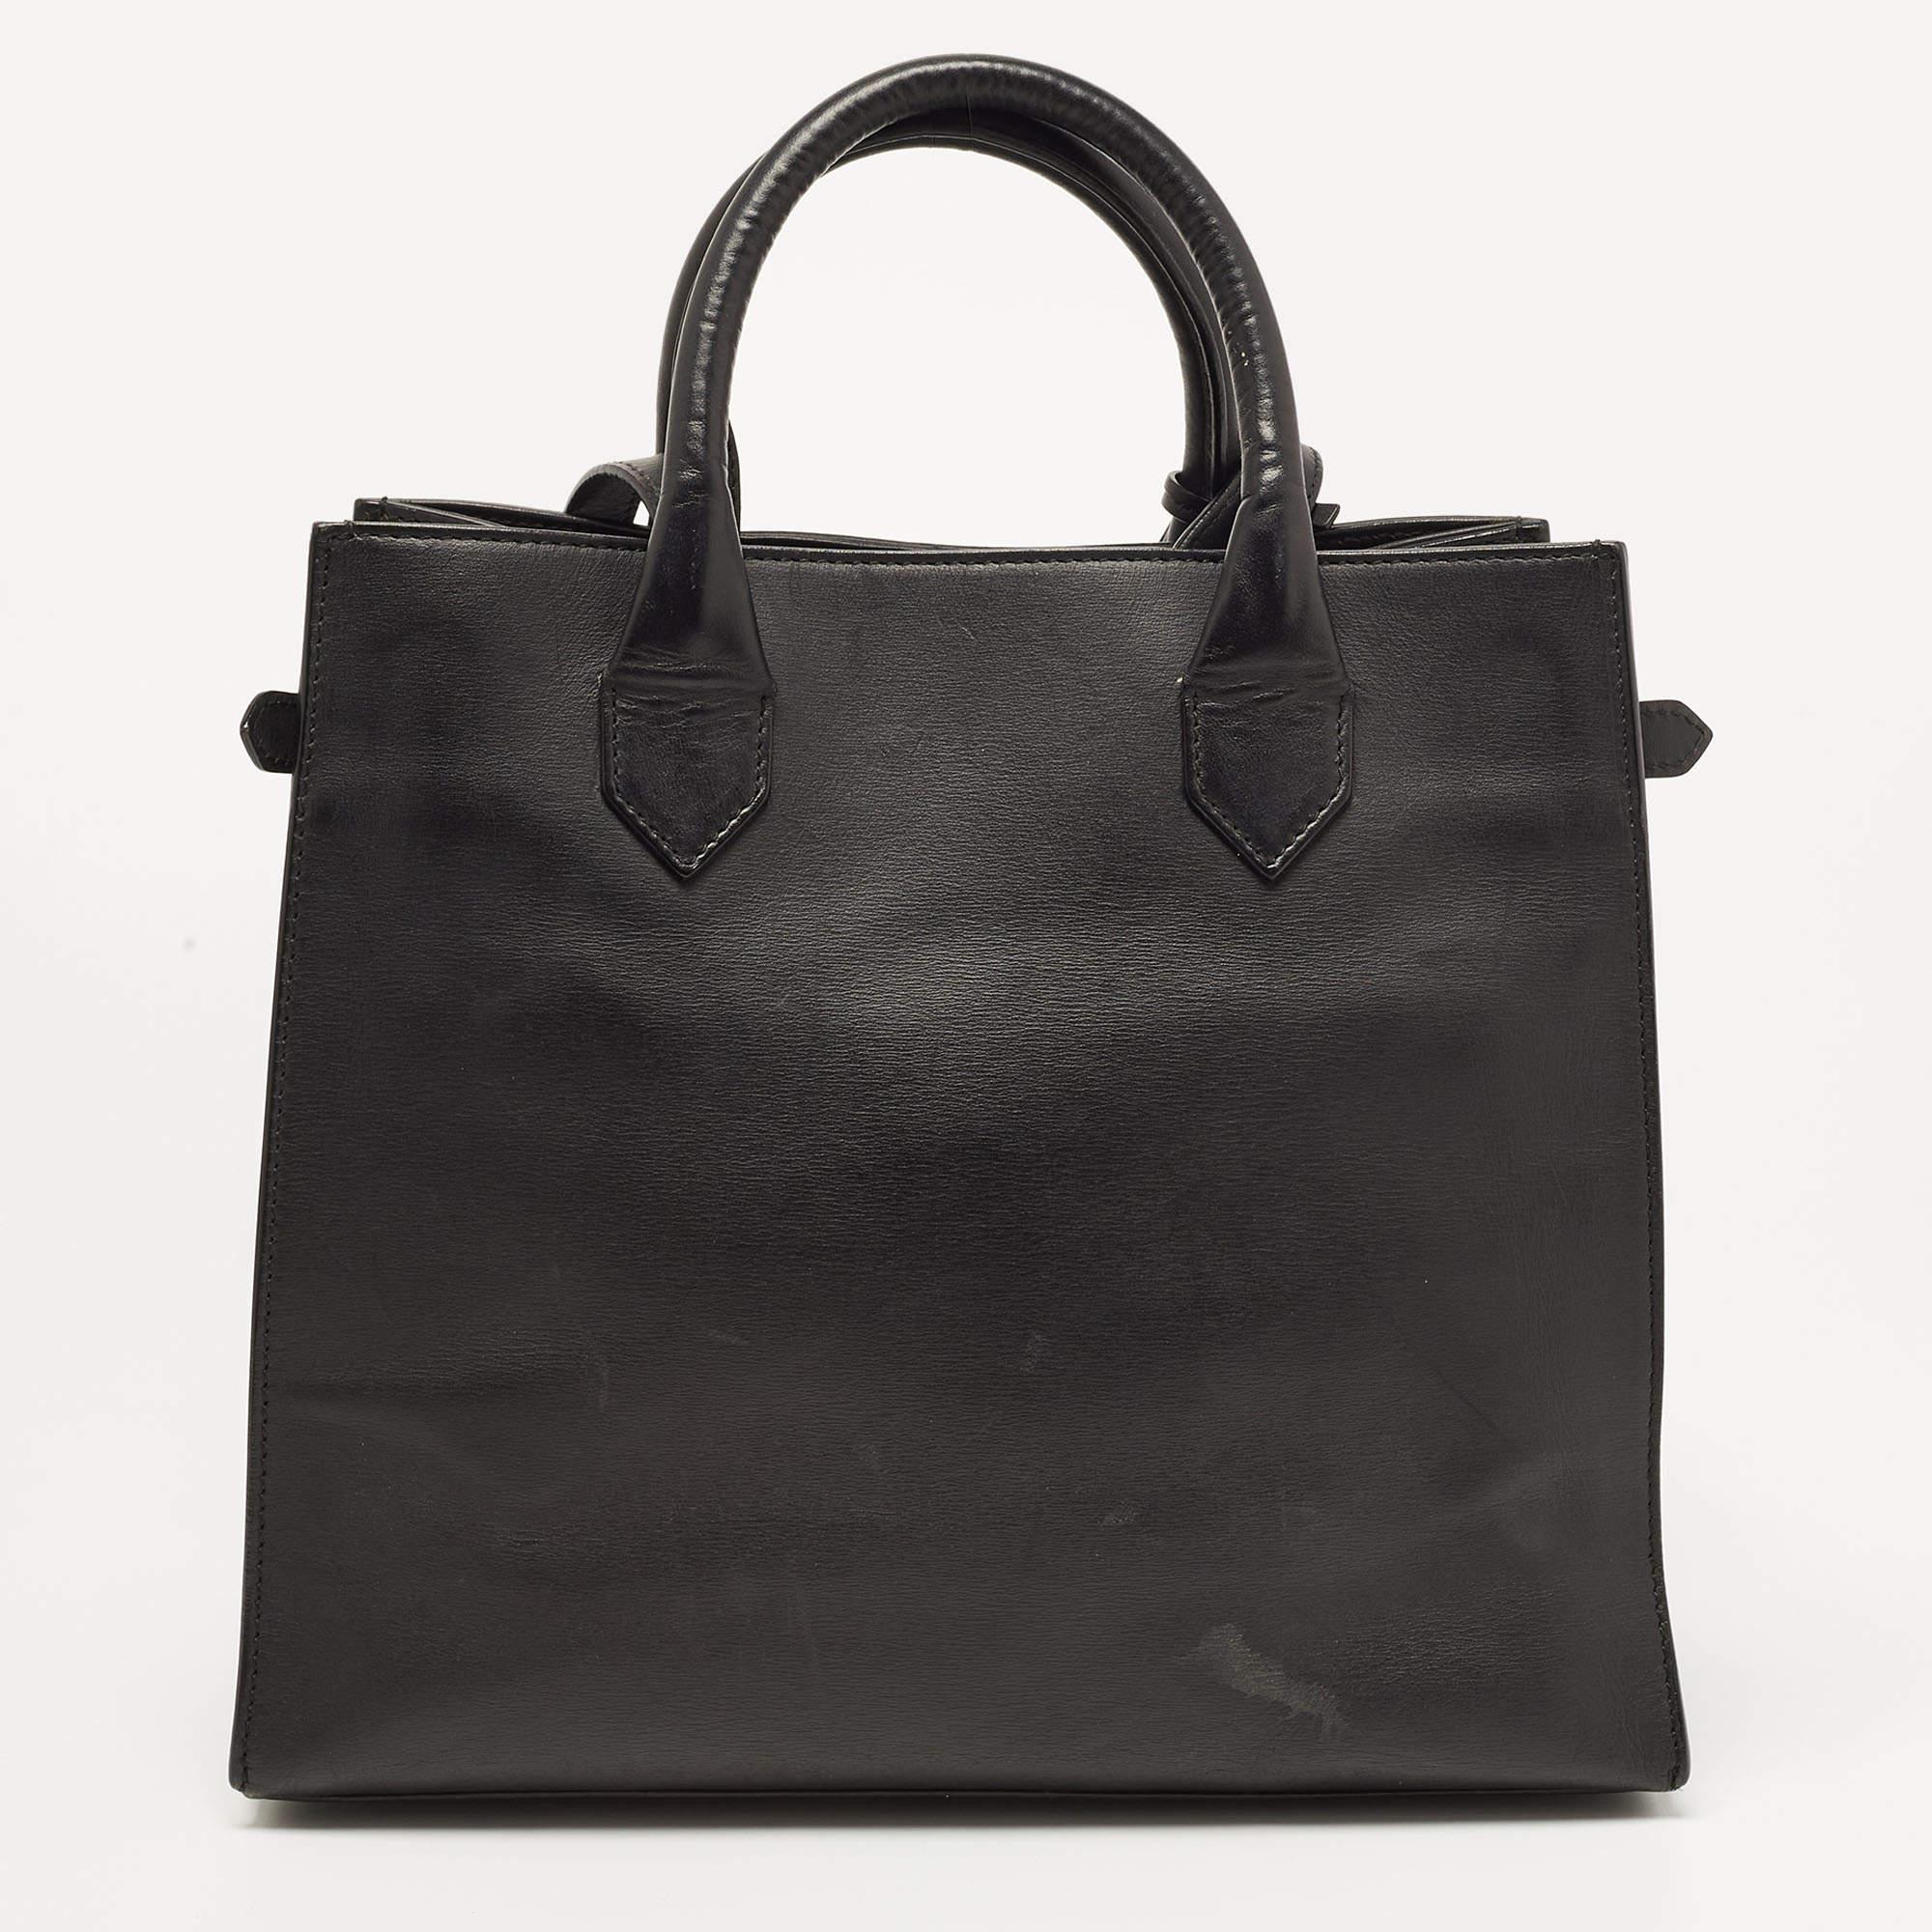 Know to create stylish, sophisticated, and timeless designs, Balenciaga is a brand worth investing in. The bags that come from this label's atelier are exquisite. This tote bag is no different. It has been made from quality materials and comes with